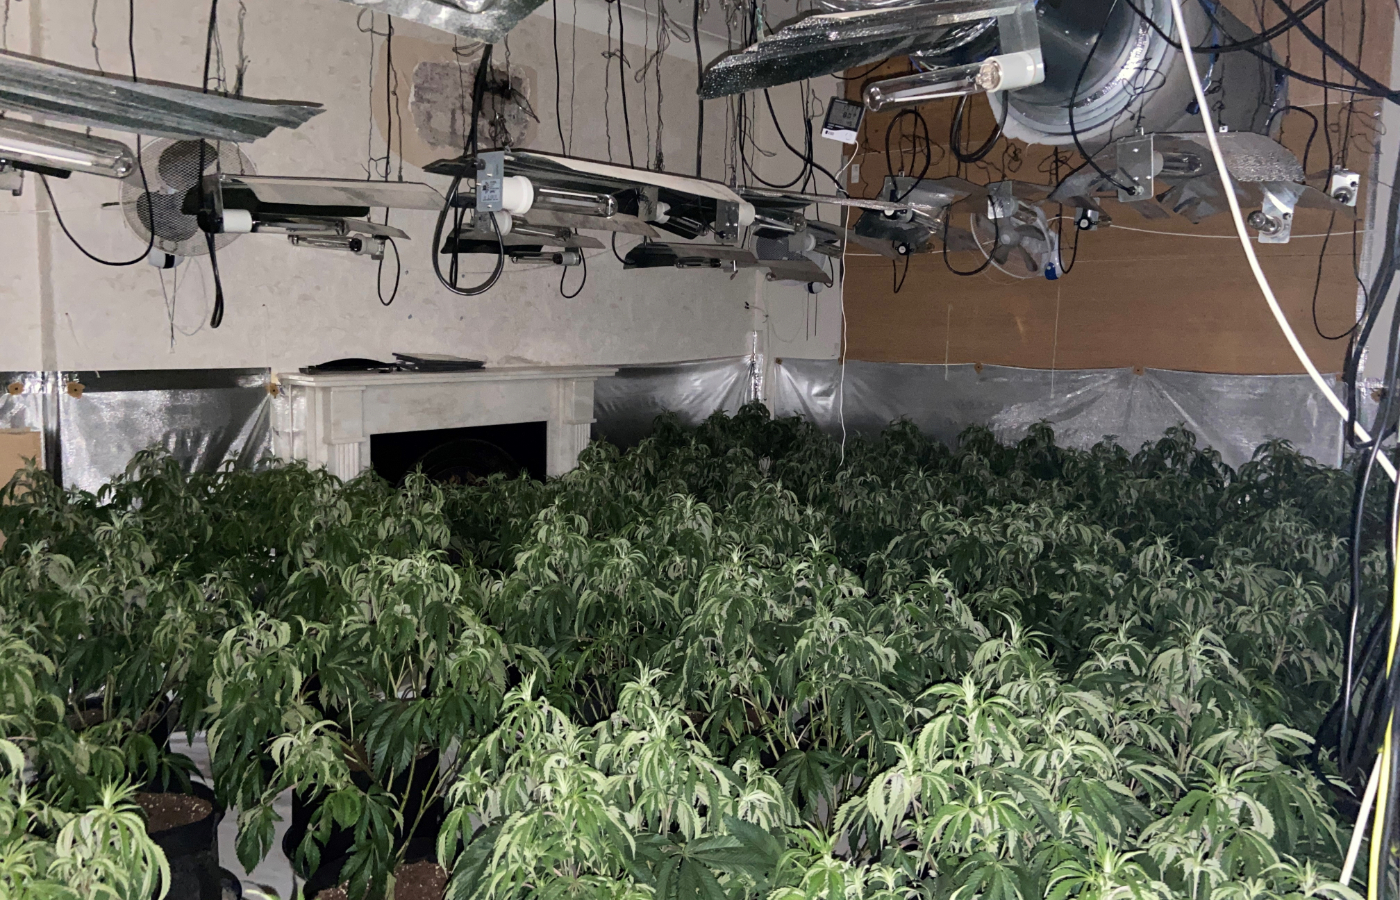 Officers recovered the 'large scale' cannabis cultivation.